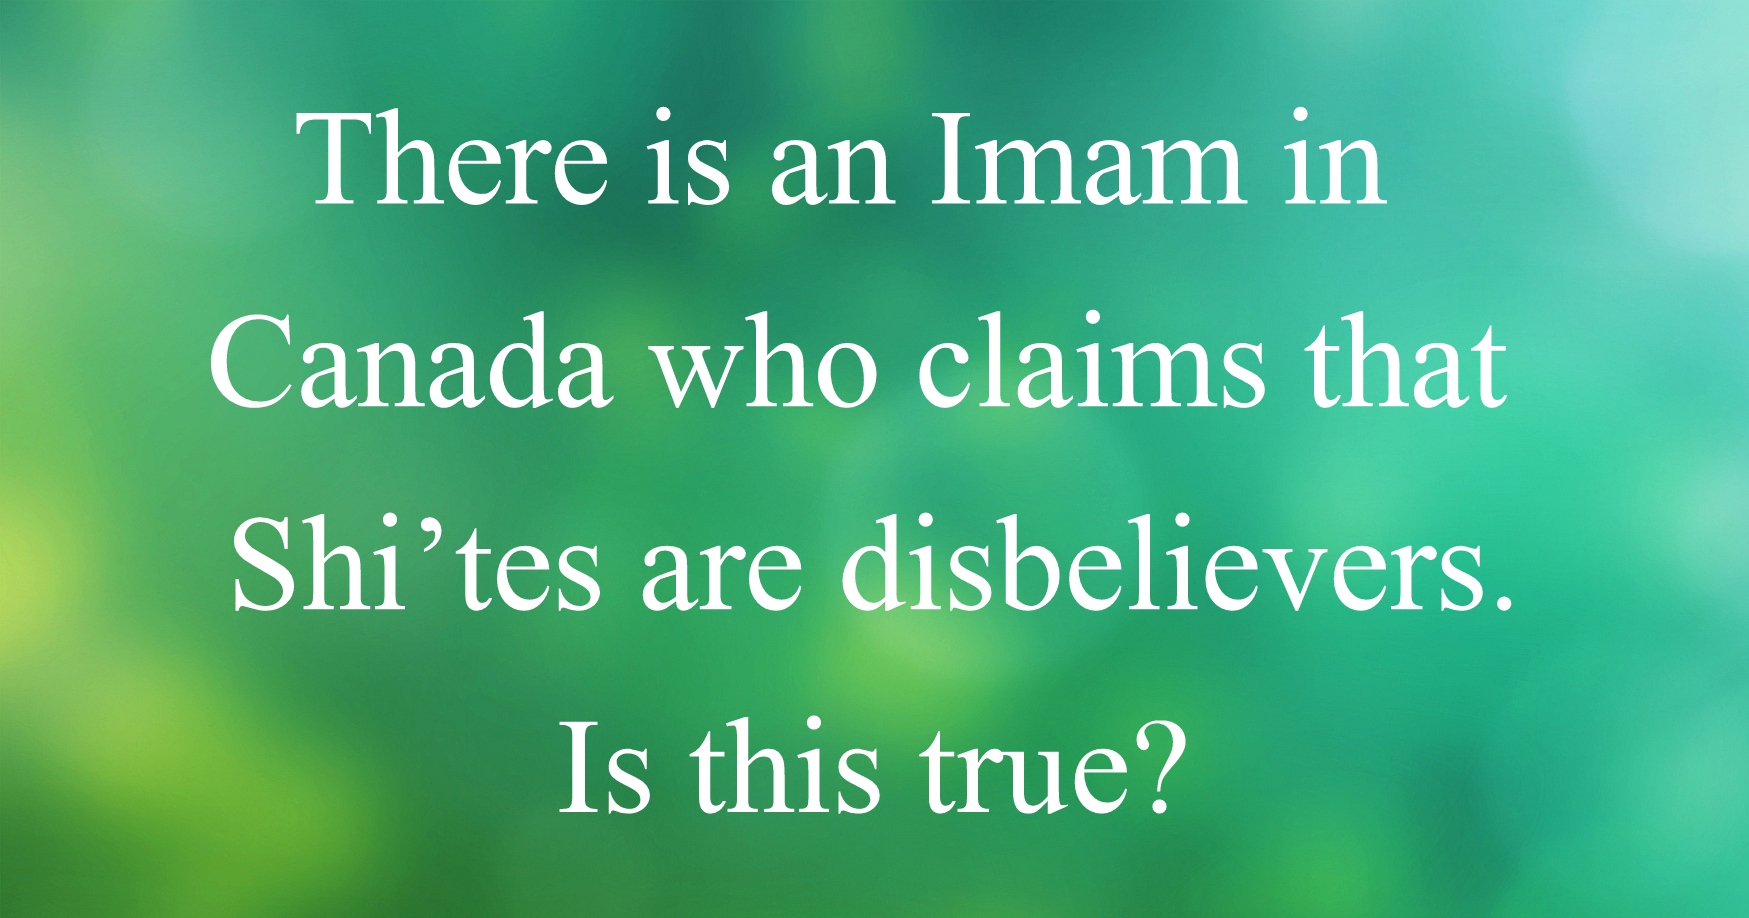 There is an Imam in Canada who claims that Shi’tes are disbelievers. Is this true?